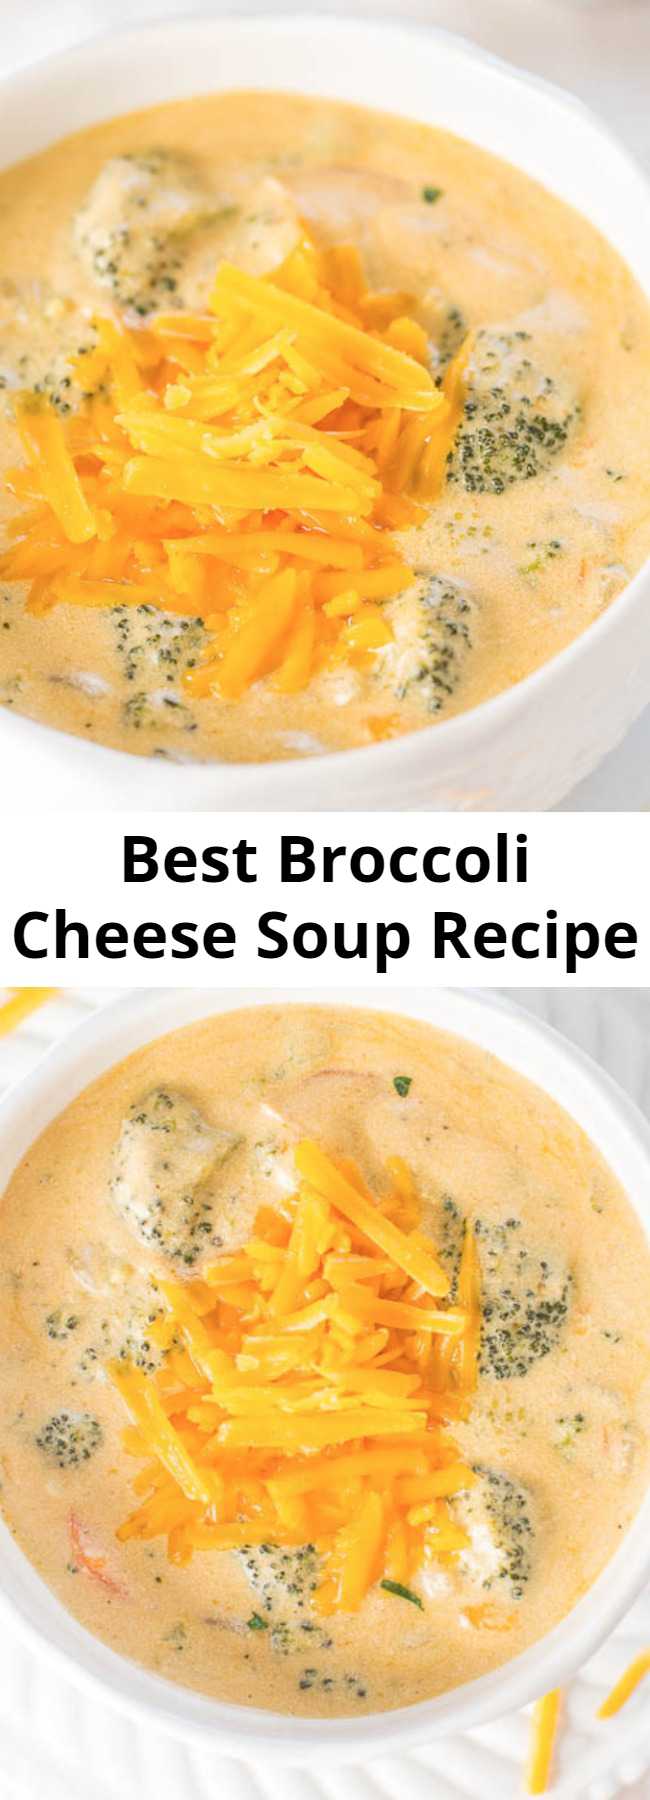 Best Broccoli Cheese Soup Recipe - This is the best broccoli cheese soup. Not only that, it’s some of the best soup I’ve ever tasted, period. If you like Panera’s broccoli cheddar soup, this blows the pants off it. It’s an easy soup to make and is ready in 1 hour. You’ll be rewarded with the best, creamiest, richest, and most amazing soup.